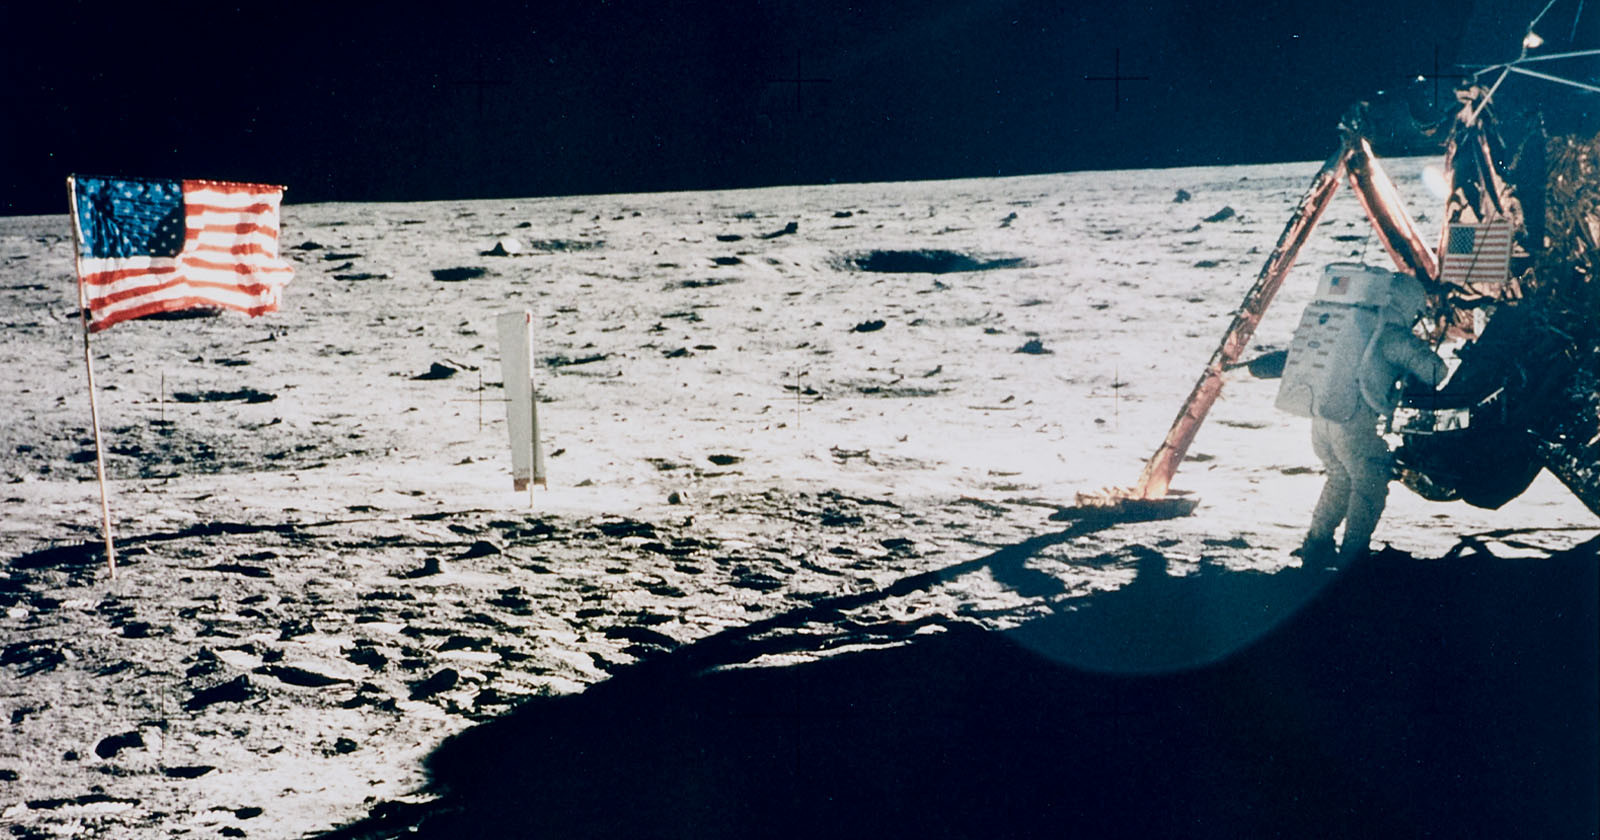  only photo neil armstrong moon estimated 